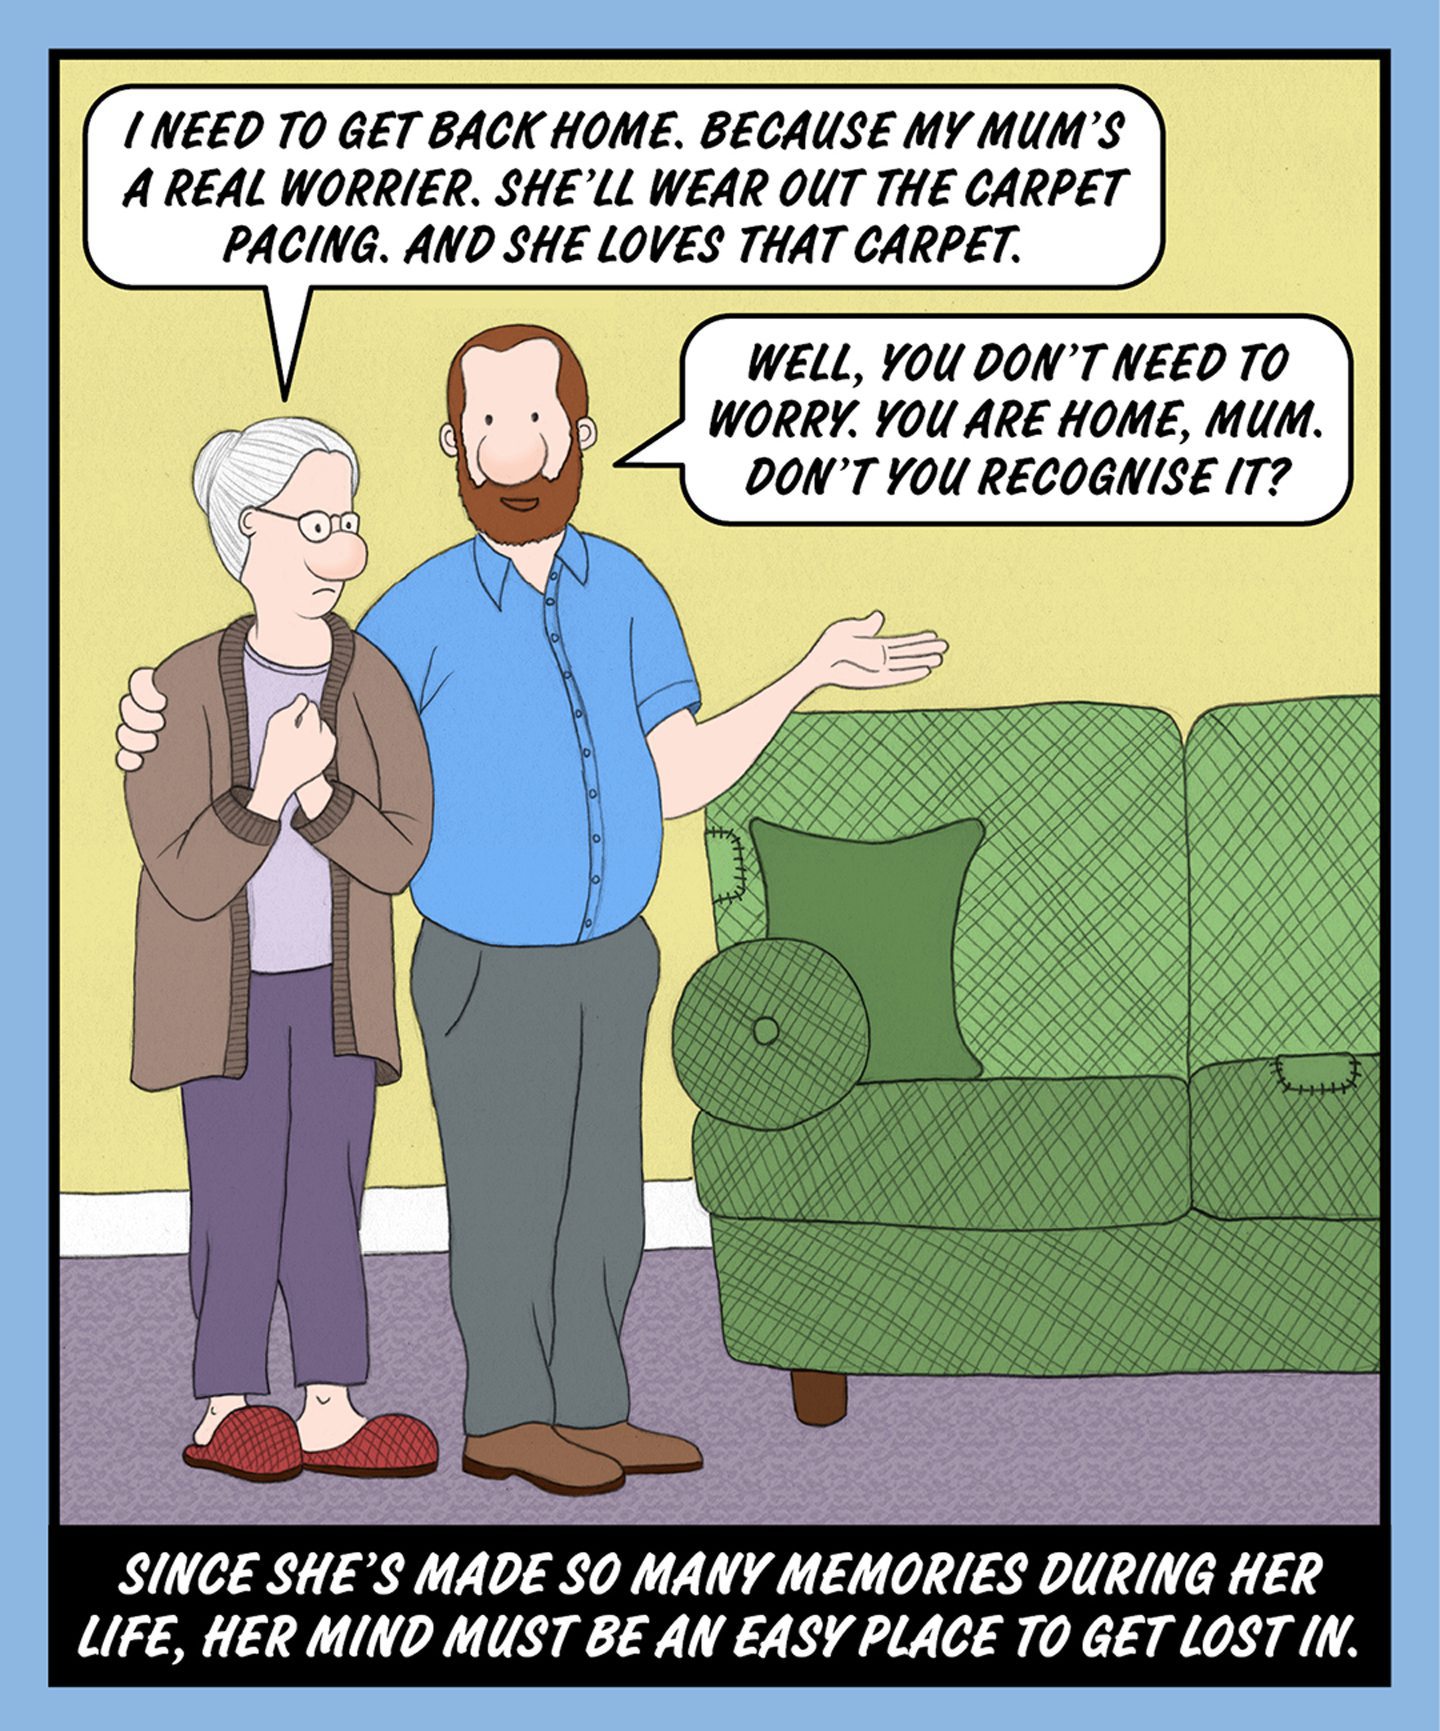 A comic illustration of a man standing comforting a granny. The speech bubble from the granny reads: I NEED TO GET BACK HOME. BECAUSE MY MUM'S A REAL WORRIER. SHE'LL WEAR OUT THE CARPET PACING. AND SHE LOVES THAT CARPET.
The speech bubble from the man reads: WELL, YOU DON'T NEED TO WORRY. YOU ARE HOME, MUM. DON'T YOU RECOGNISE IT?

The text below the image reads: SINCE SHE'S MADE SO MANY MEMORIES DURING HER LIFE, HER MIND MUST BE AN EASY PLACE TO GET LOST IN. 